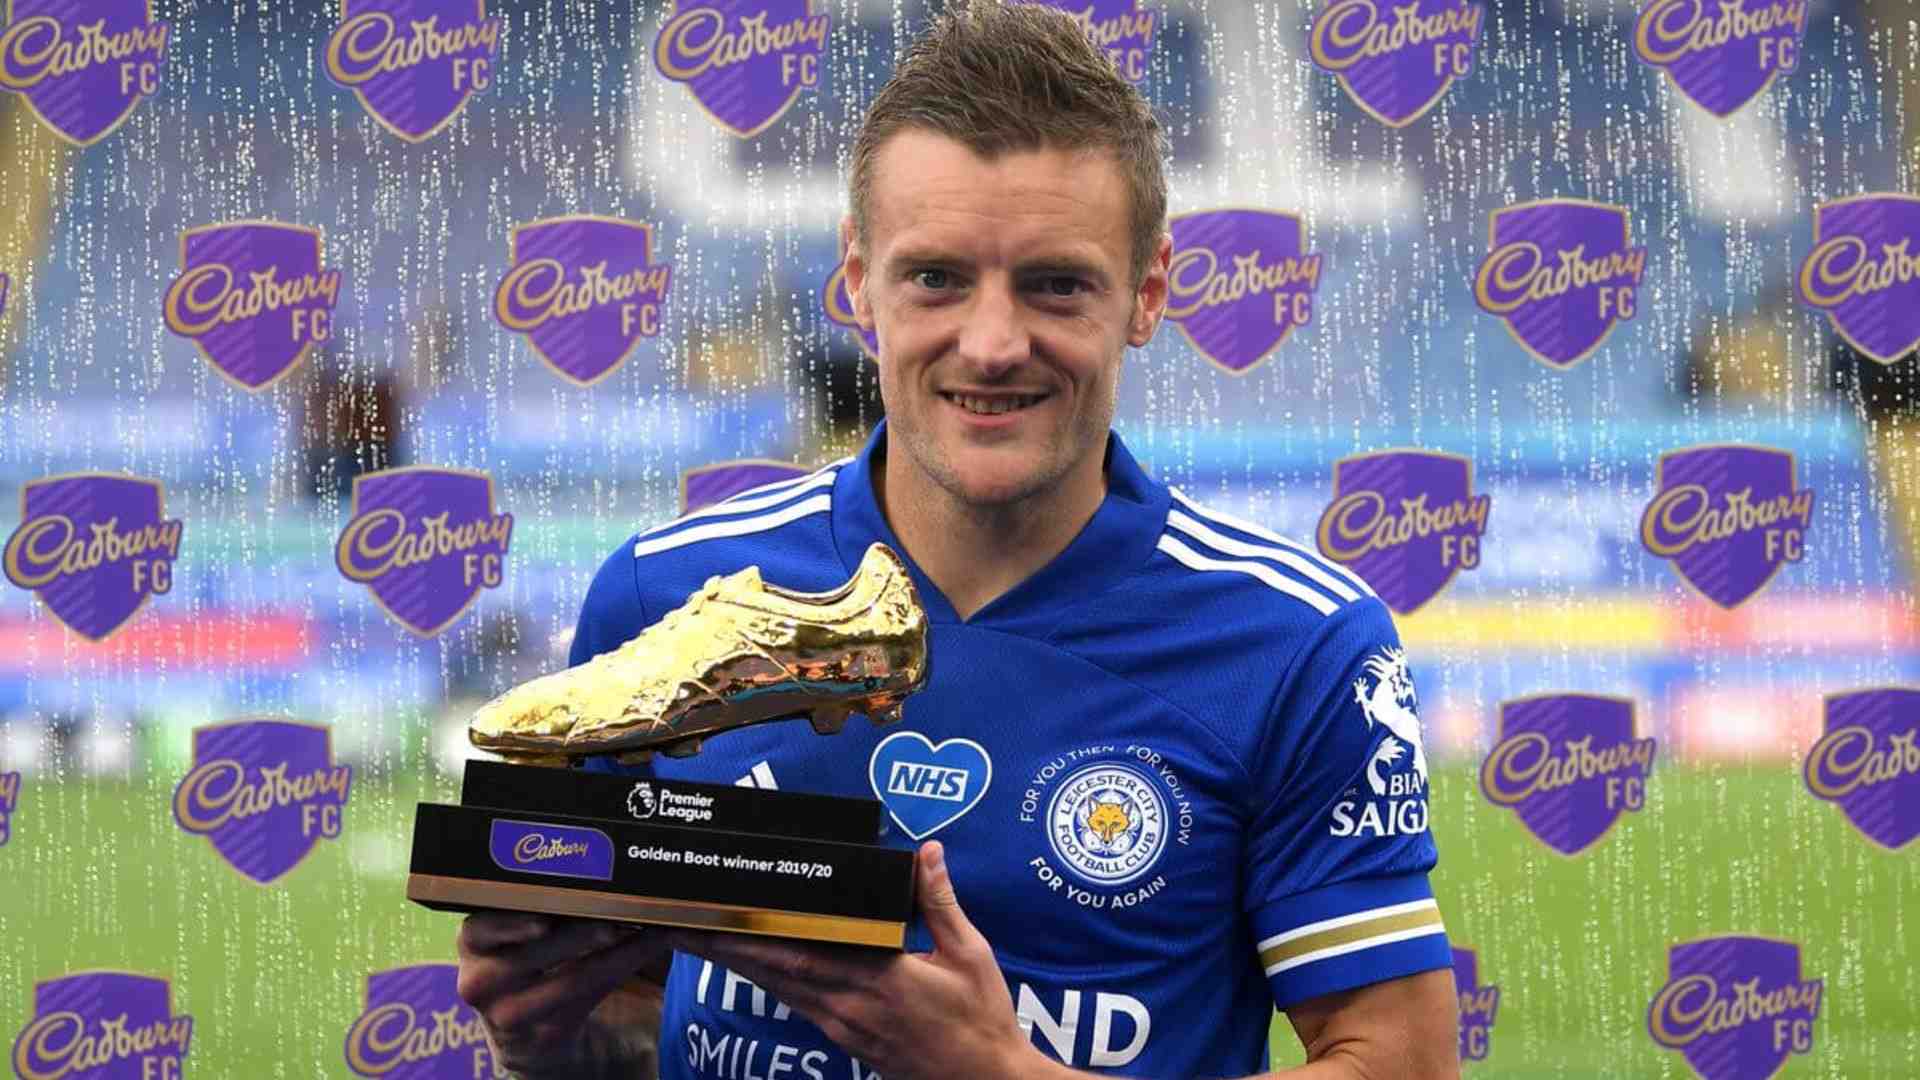 Jamie Vardy is a major source of inspiration for emerging footballers. (Image Credit: Twitter)